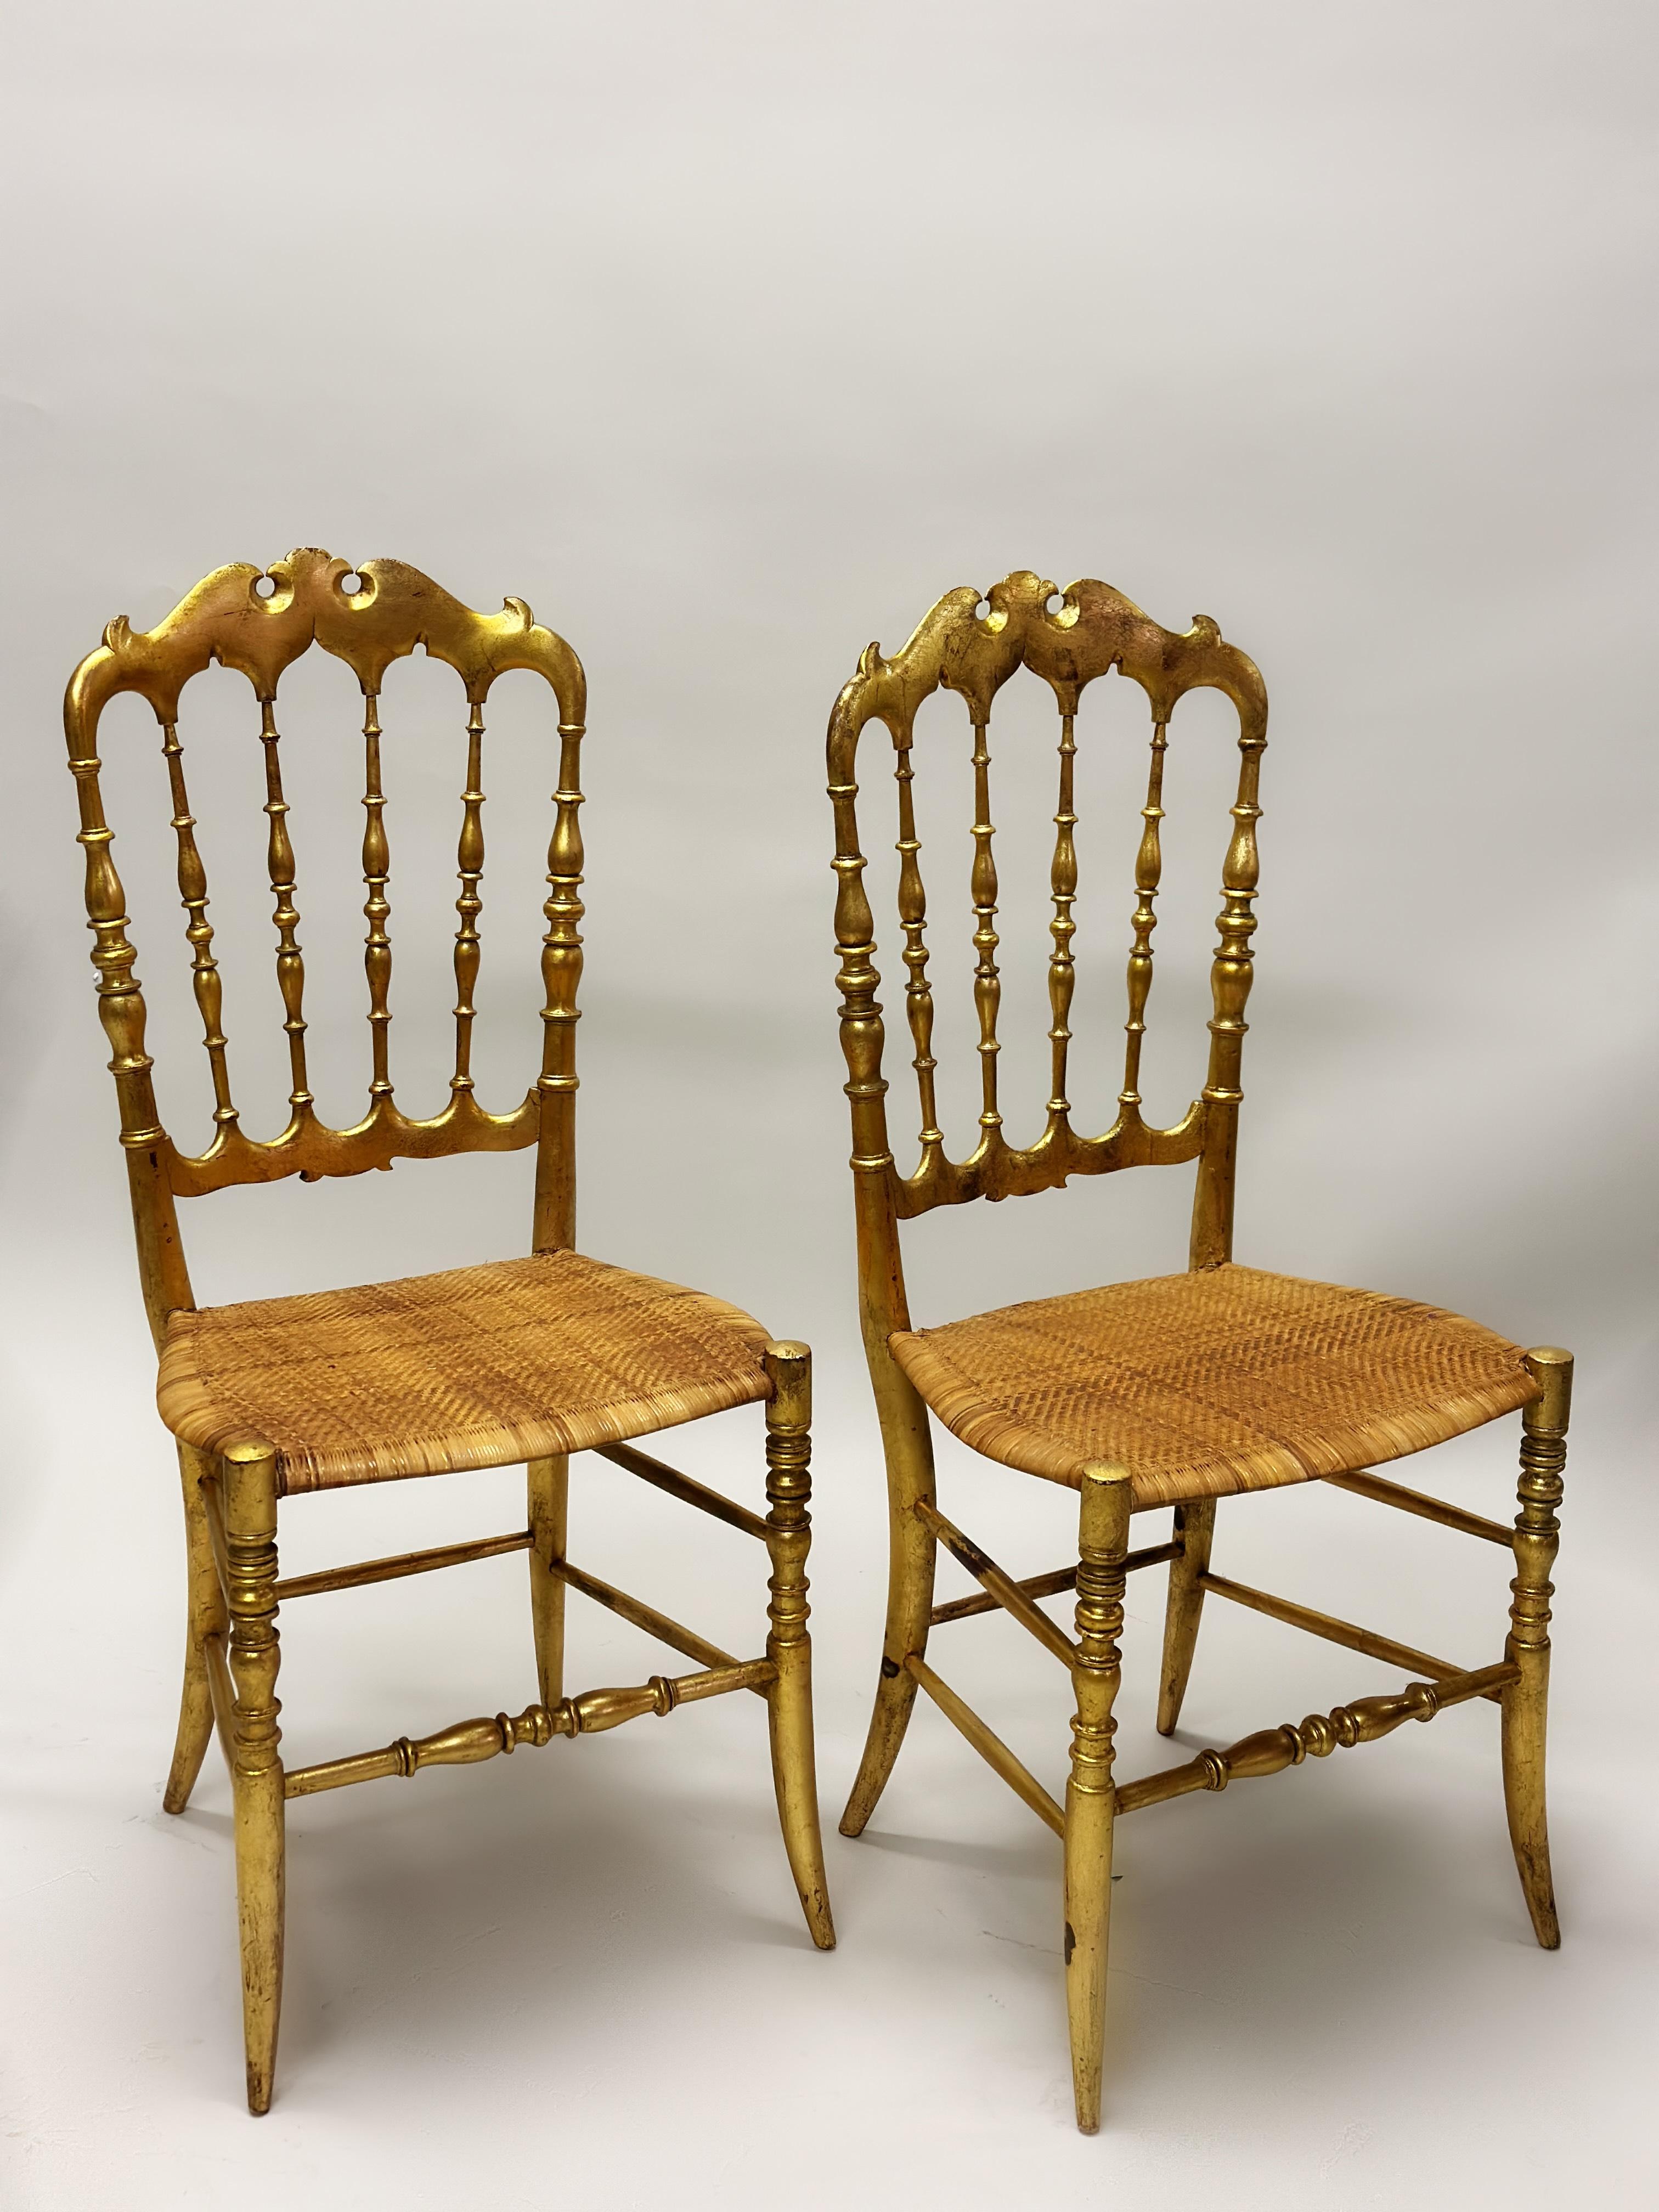 Set of 8 Italian Modern Neoclassical Dining Chairs in Carved Gilt Wood & Rattan In Good Condition For Sale In New York, NY